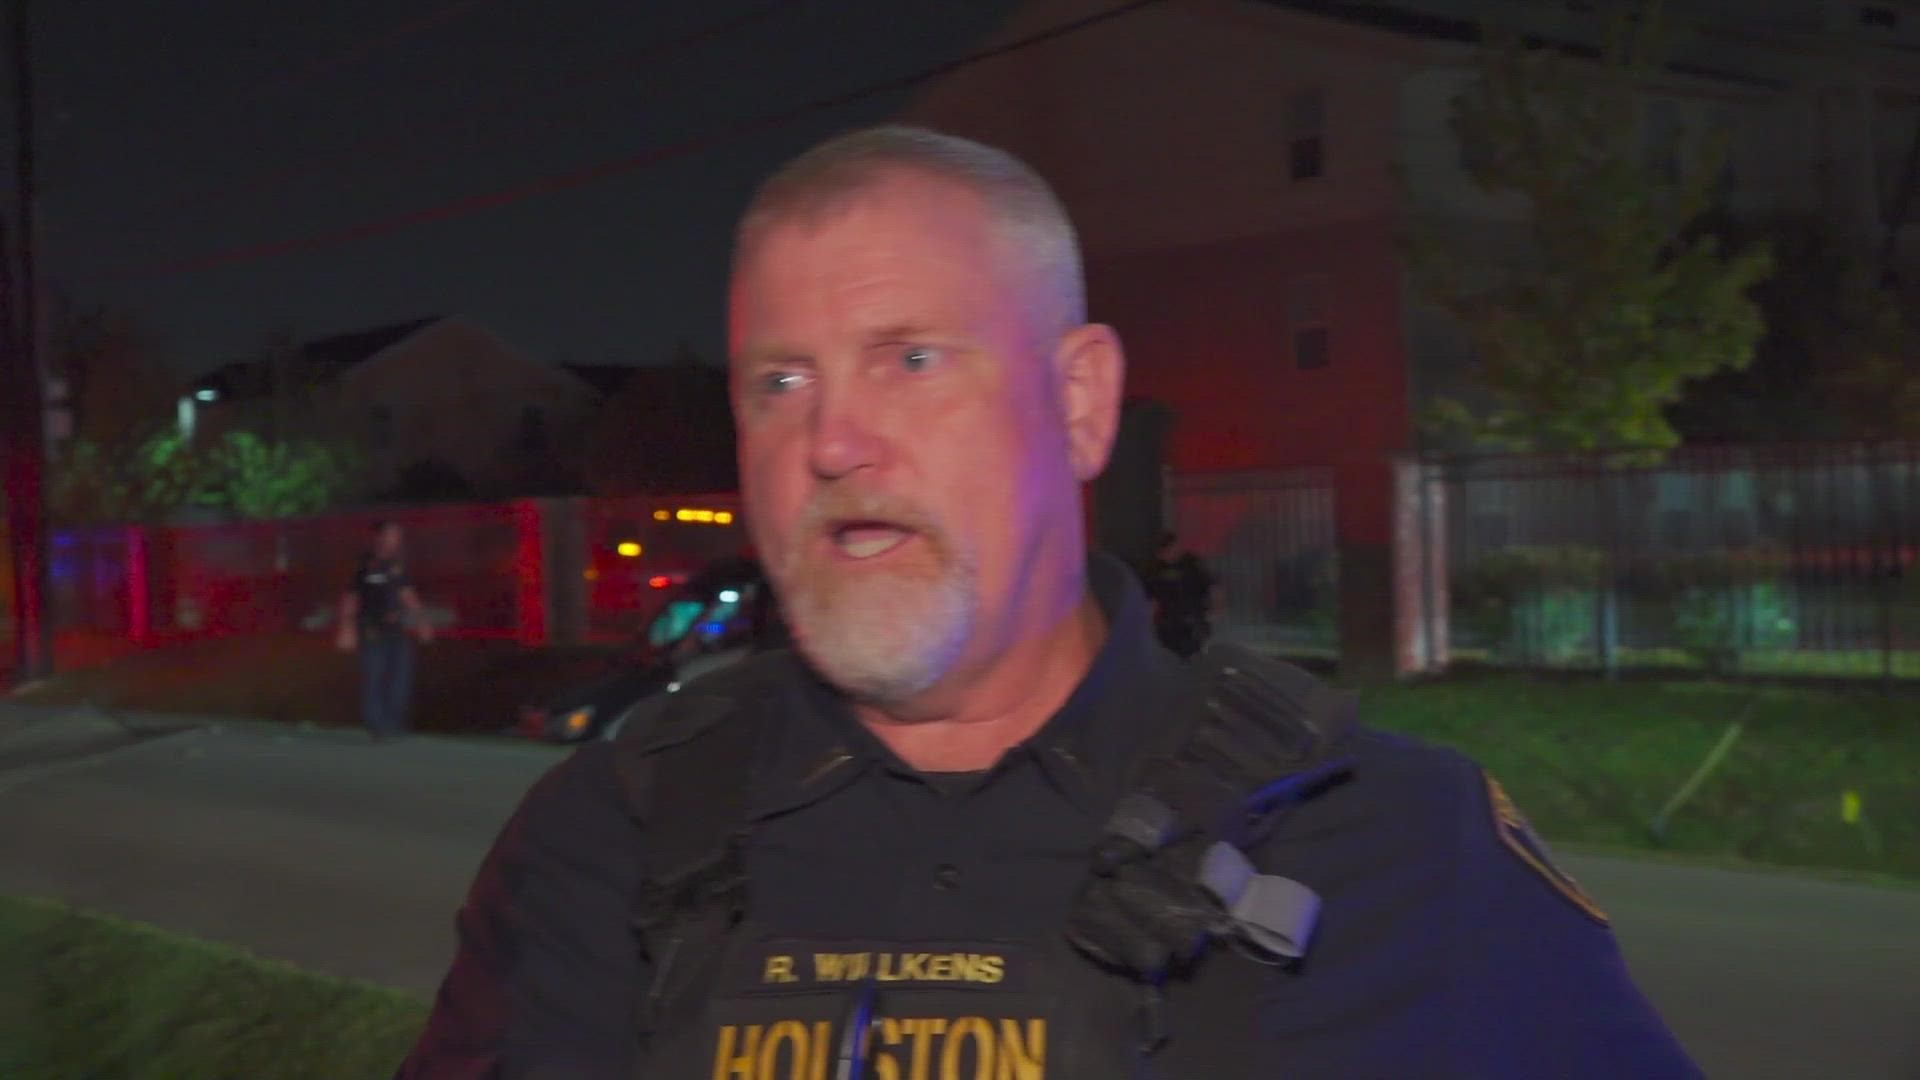 A police officer was transported to a local hospital after a short chase ended in a crash in north Houston early Saturday morning, according to police.